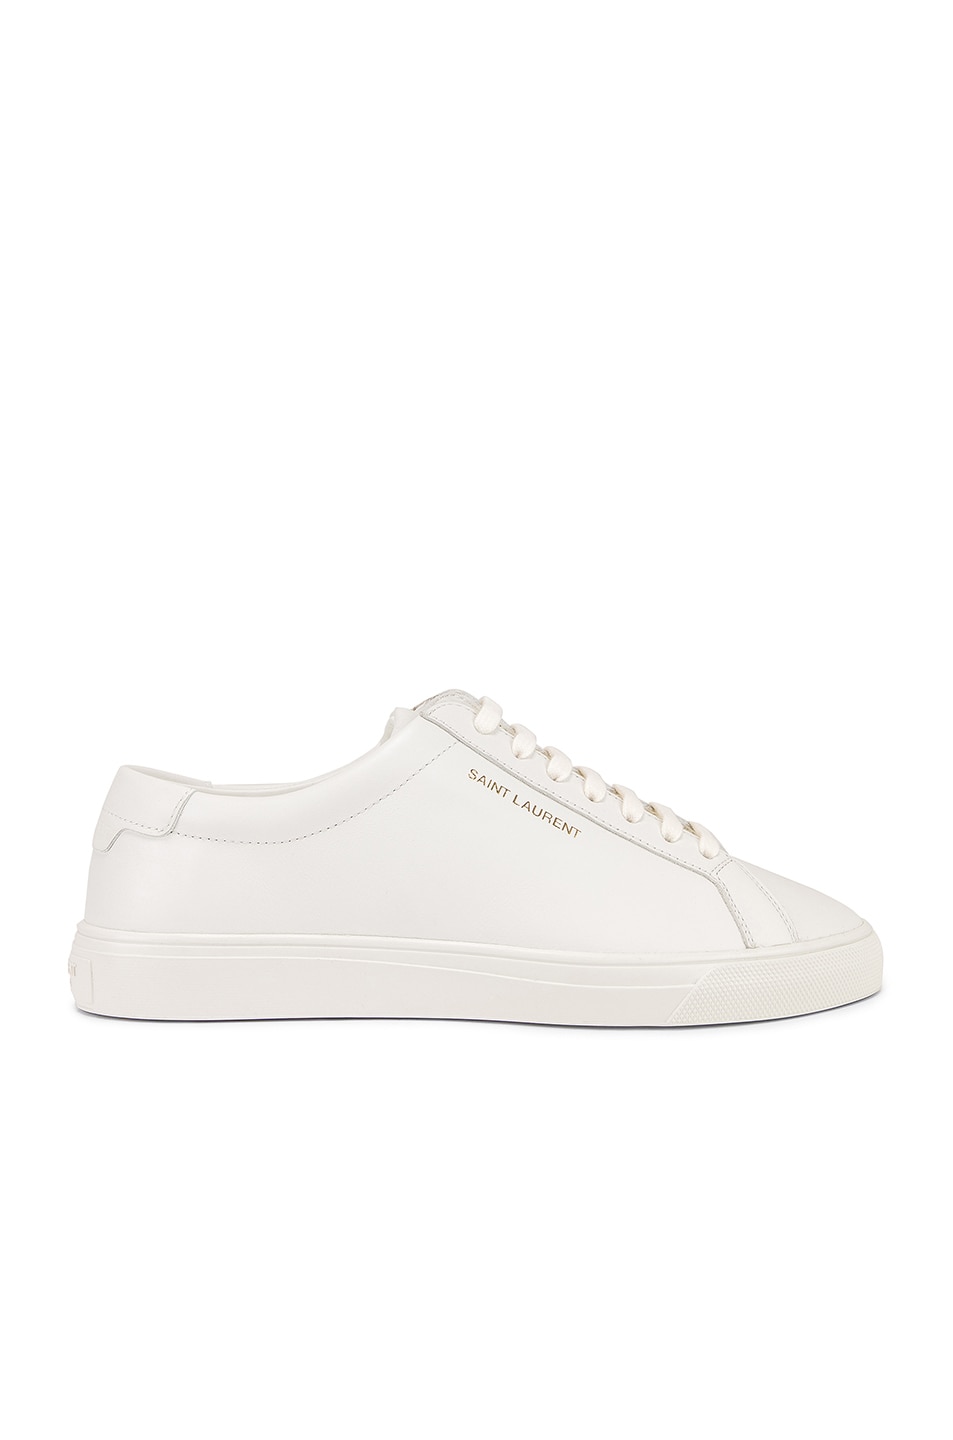 Image 1 of Saint Laurent Andy Sneaker in White